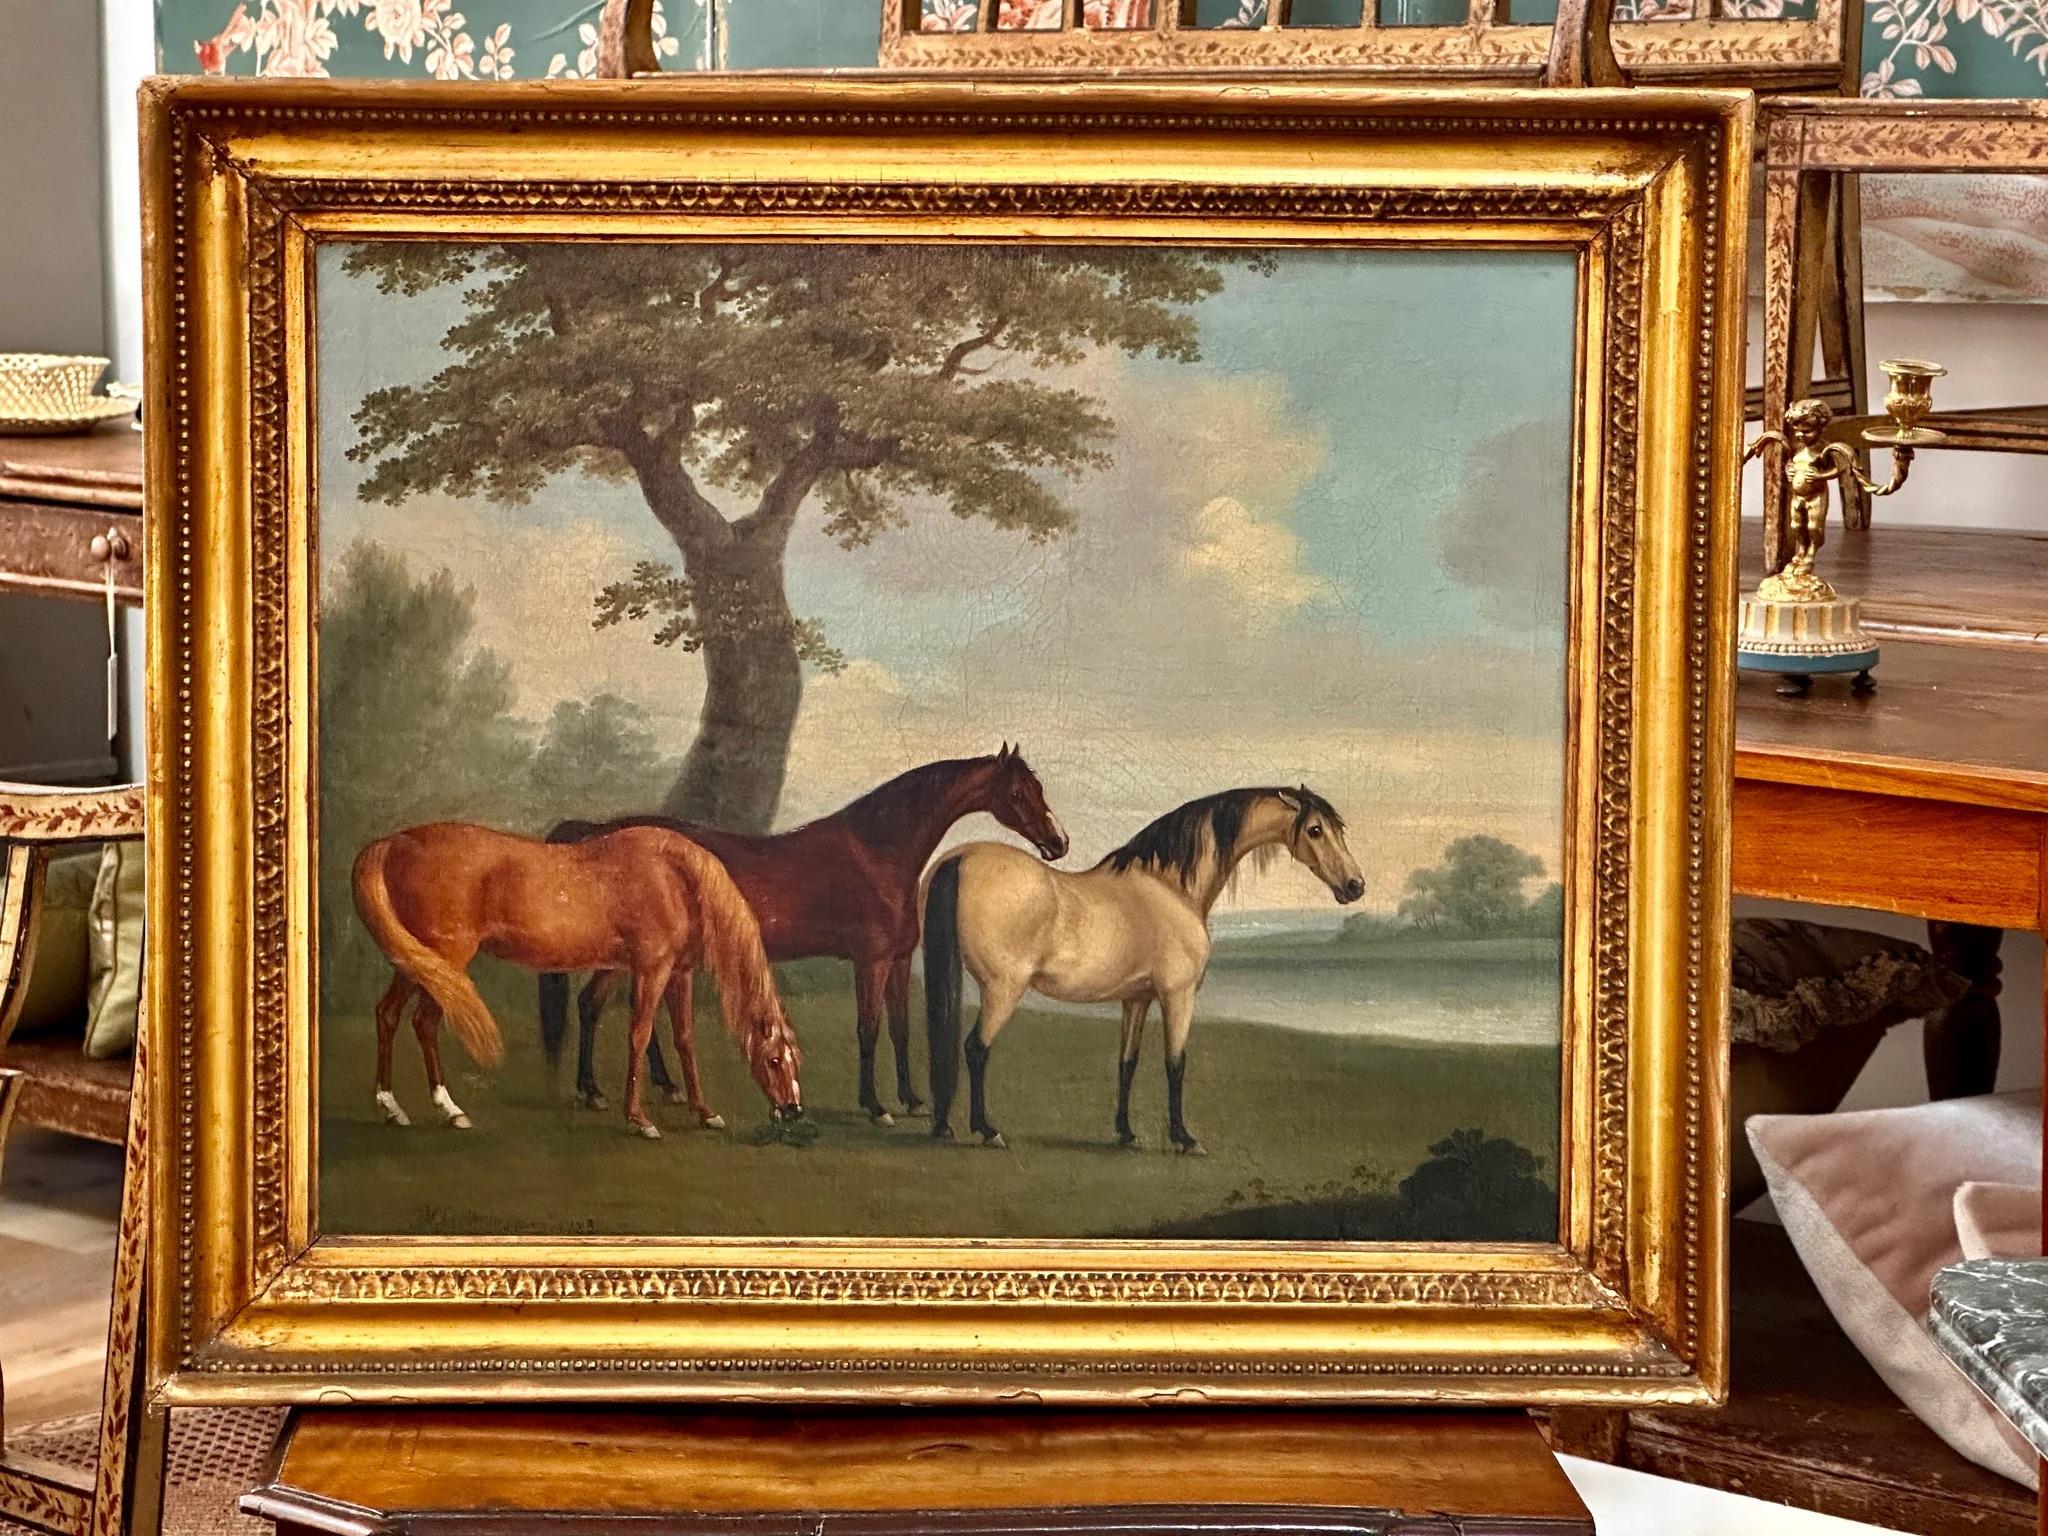 Three horses in a landscape overlooking water, signed (1759-1828), oil on canvas,  signed lower right,  signed John Nost Sartorious / Francis Sartorious/ John Francis S?? (1759-1828) Alias:John Nott SartoriusL. N. Satorius 16 7/8” h. x 20 ¾” w, the